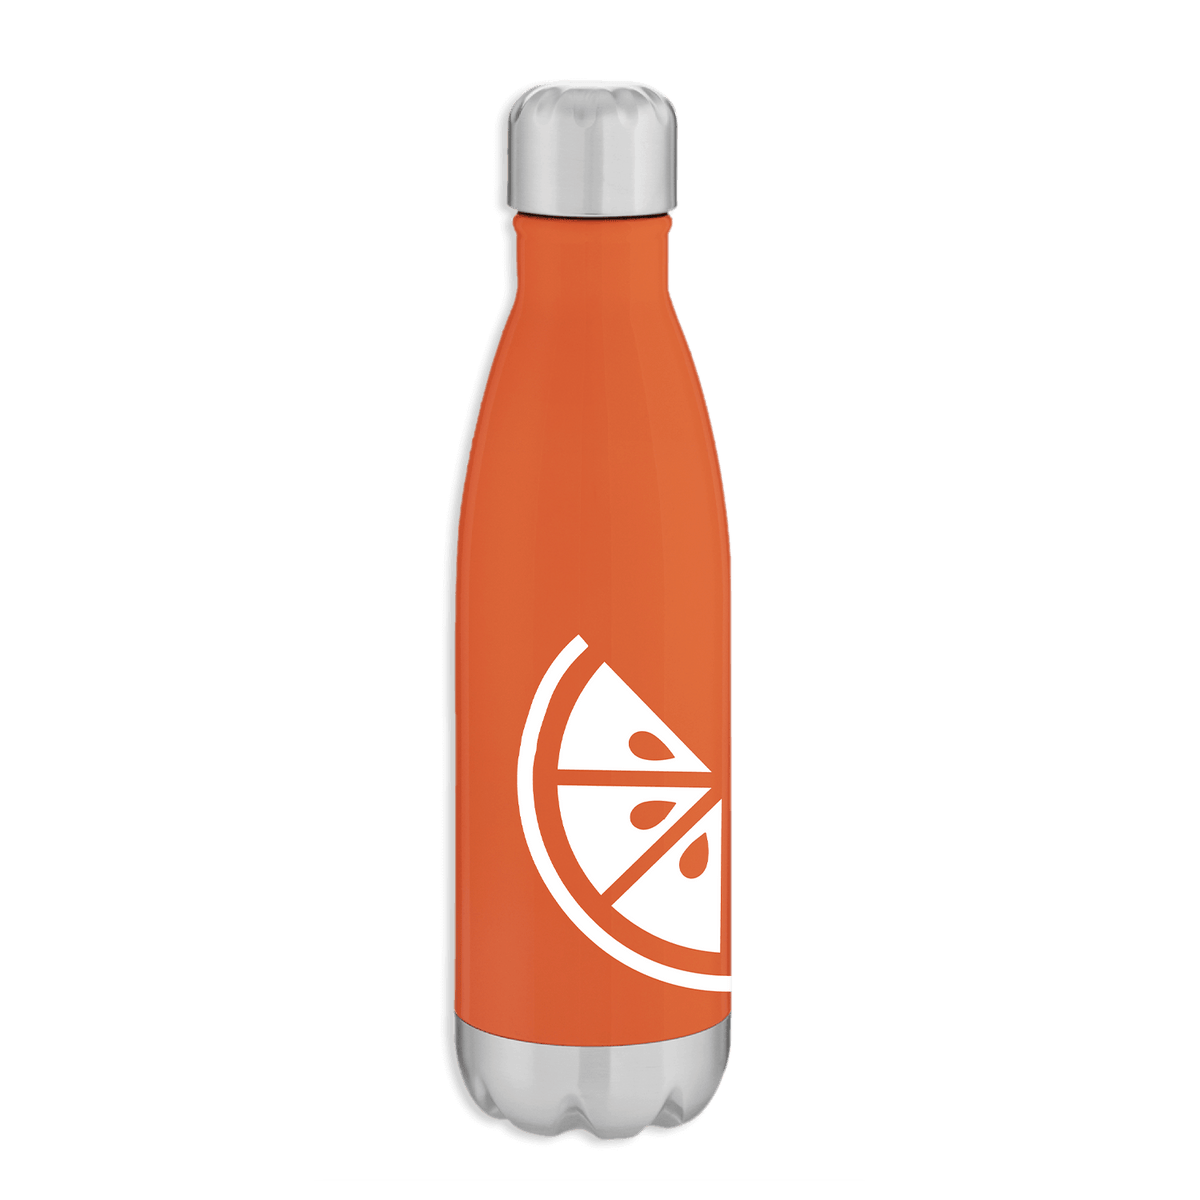 RIND Stainless Steel Water Bottle